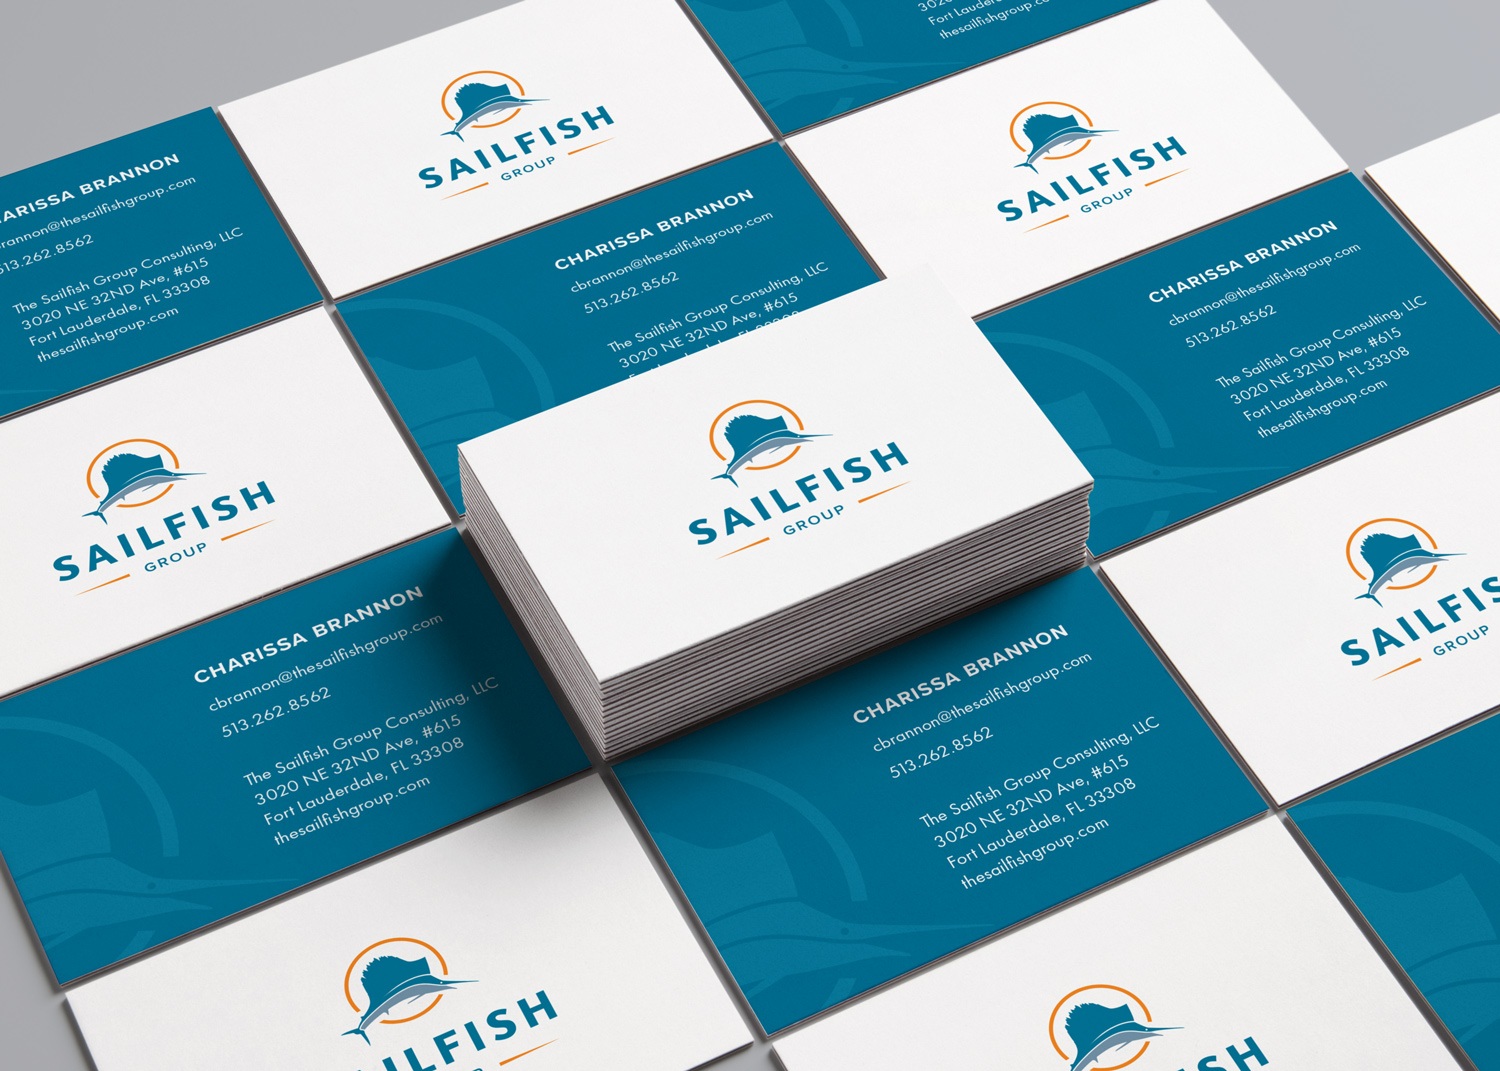 A photo of a business card design for Sailfish Group